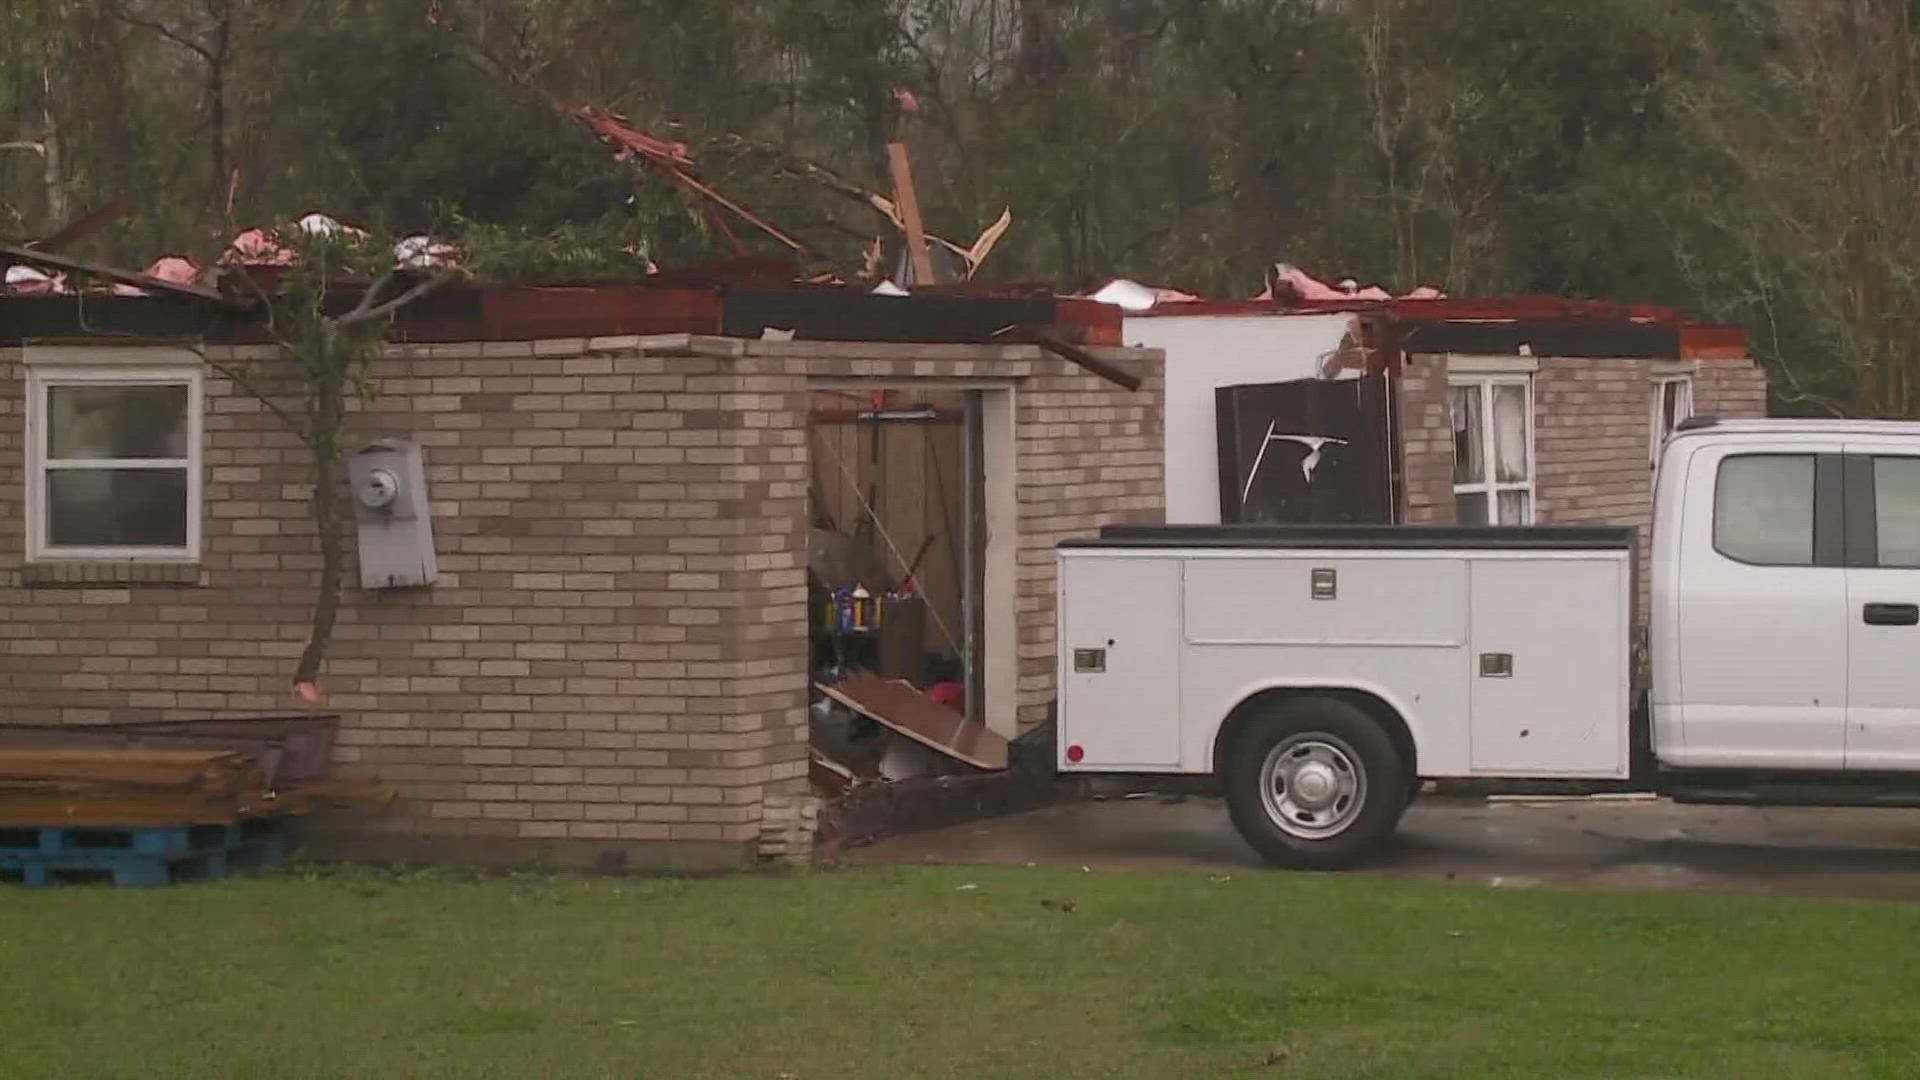 WWL-TV team tracks tornado damage and meets with affected residents.